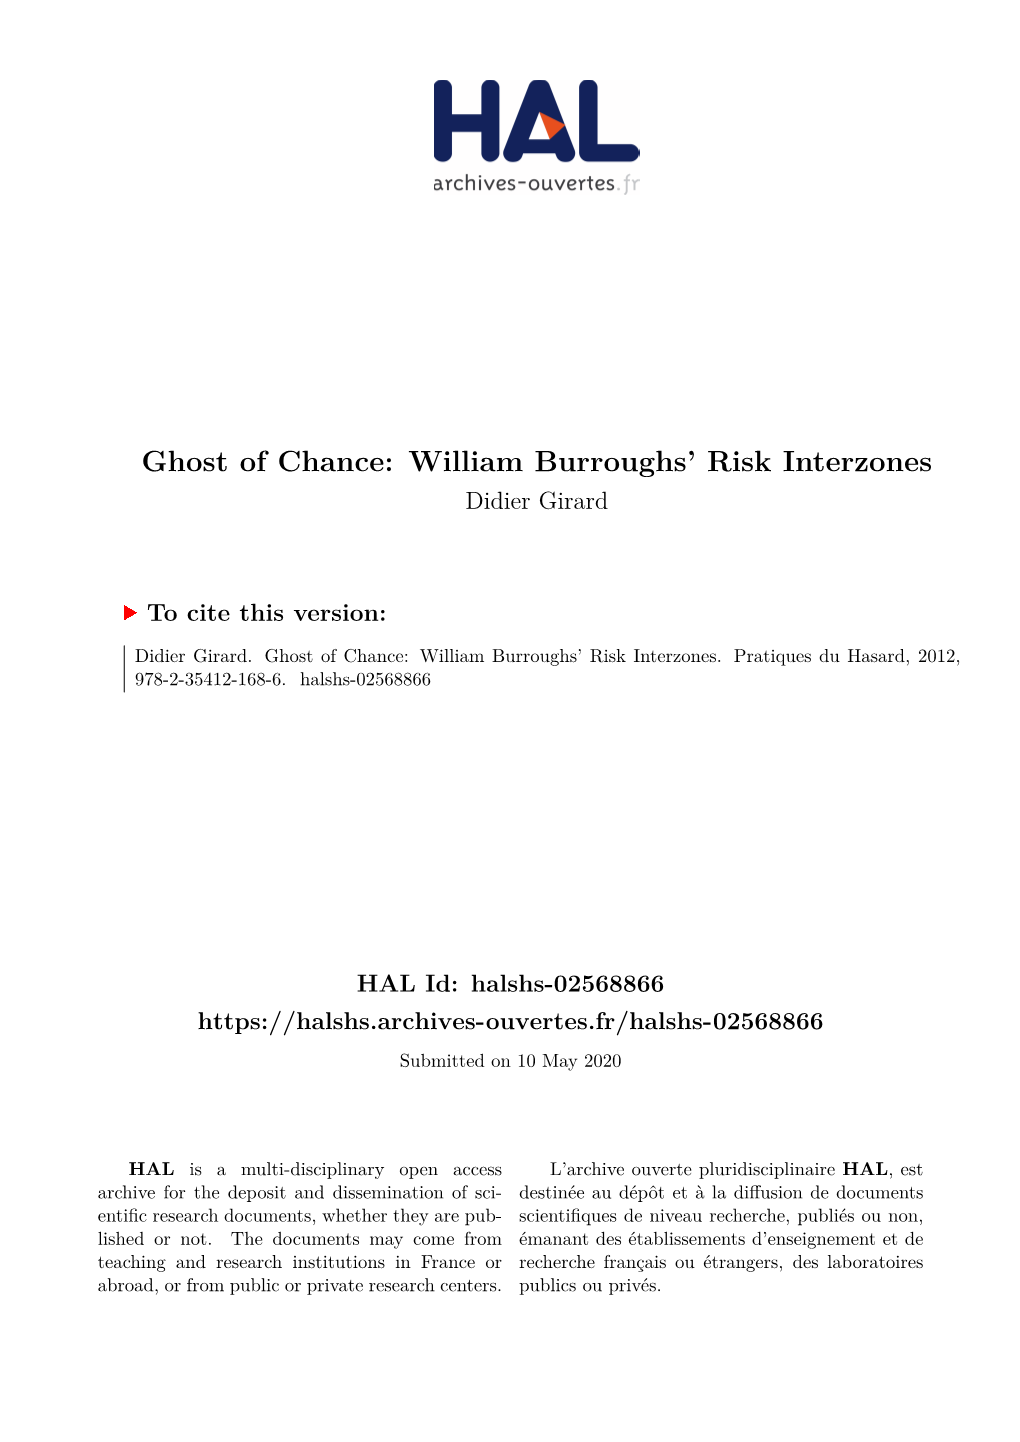 Ghost of Chance: William Burroughs' Risk Interzones